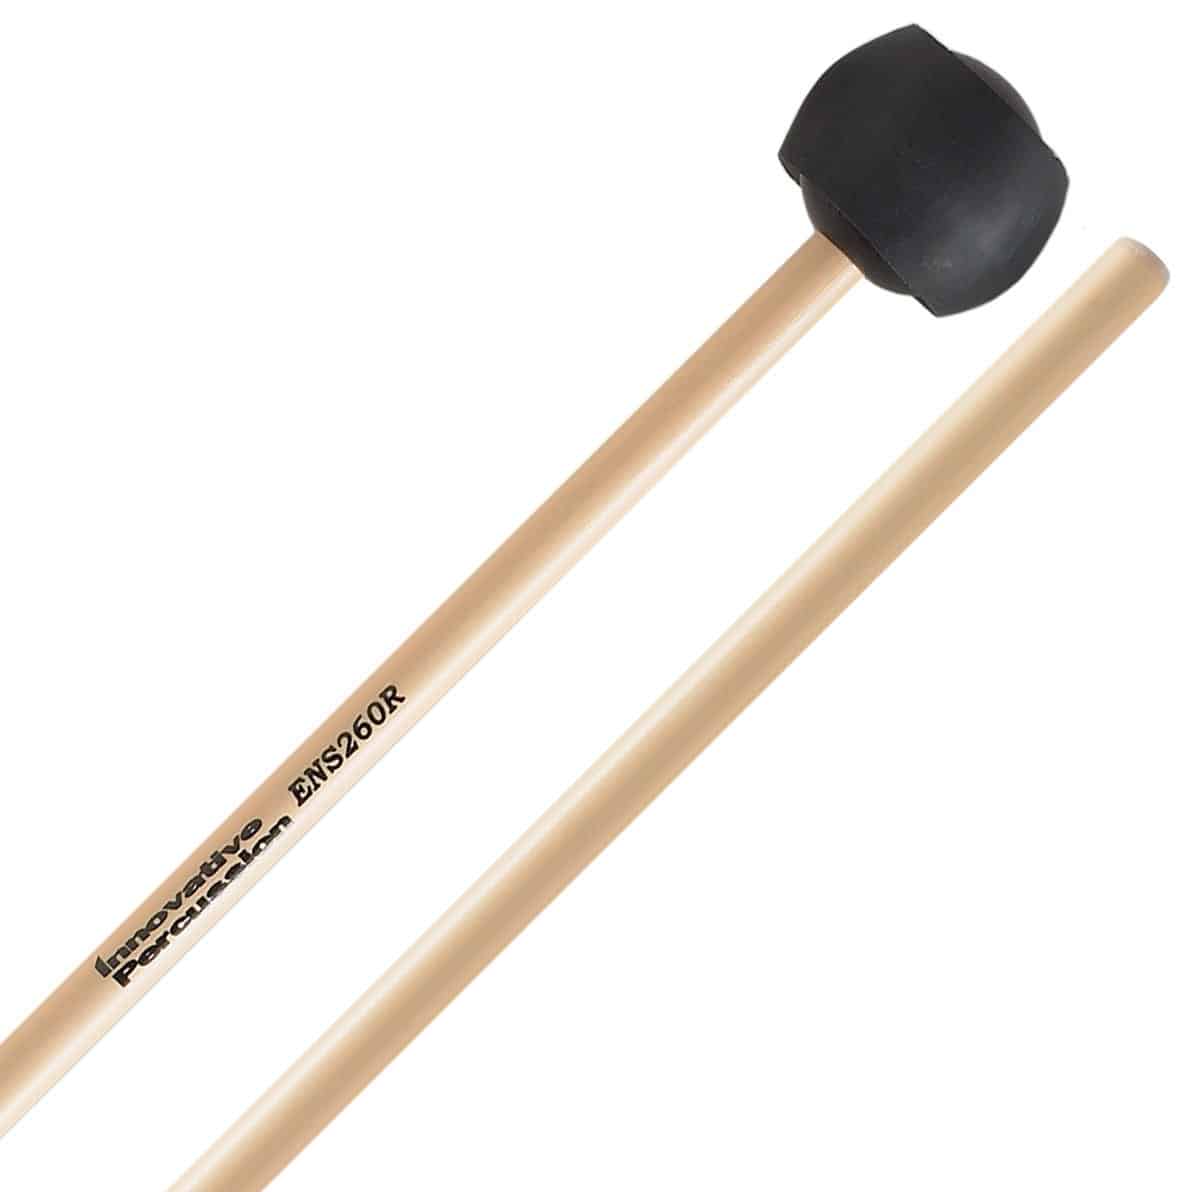 Innovative Percussion ENS260 Ensemble Series Hard Core Latex Covered Mallets